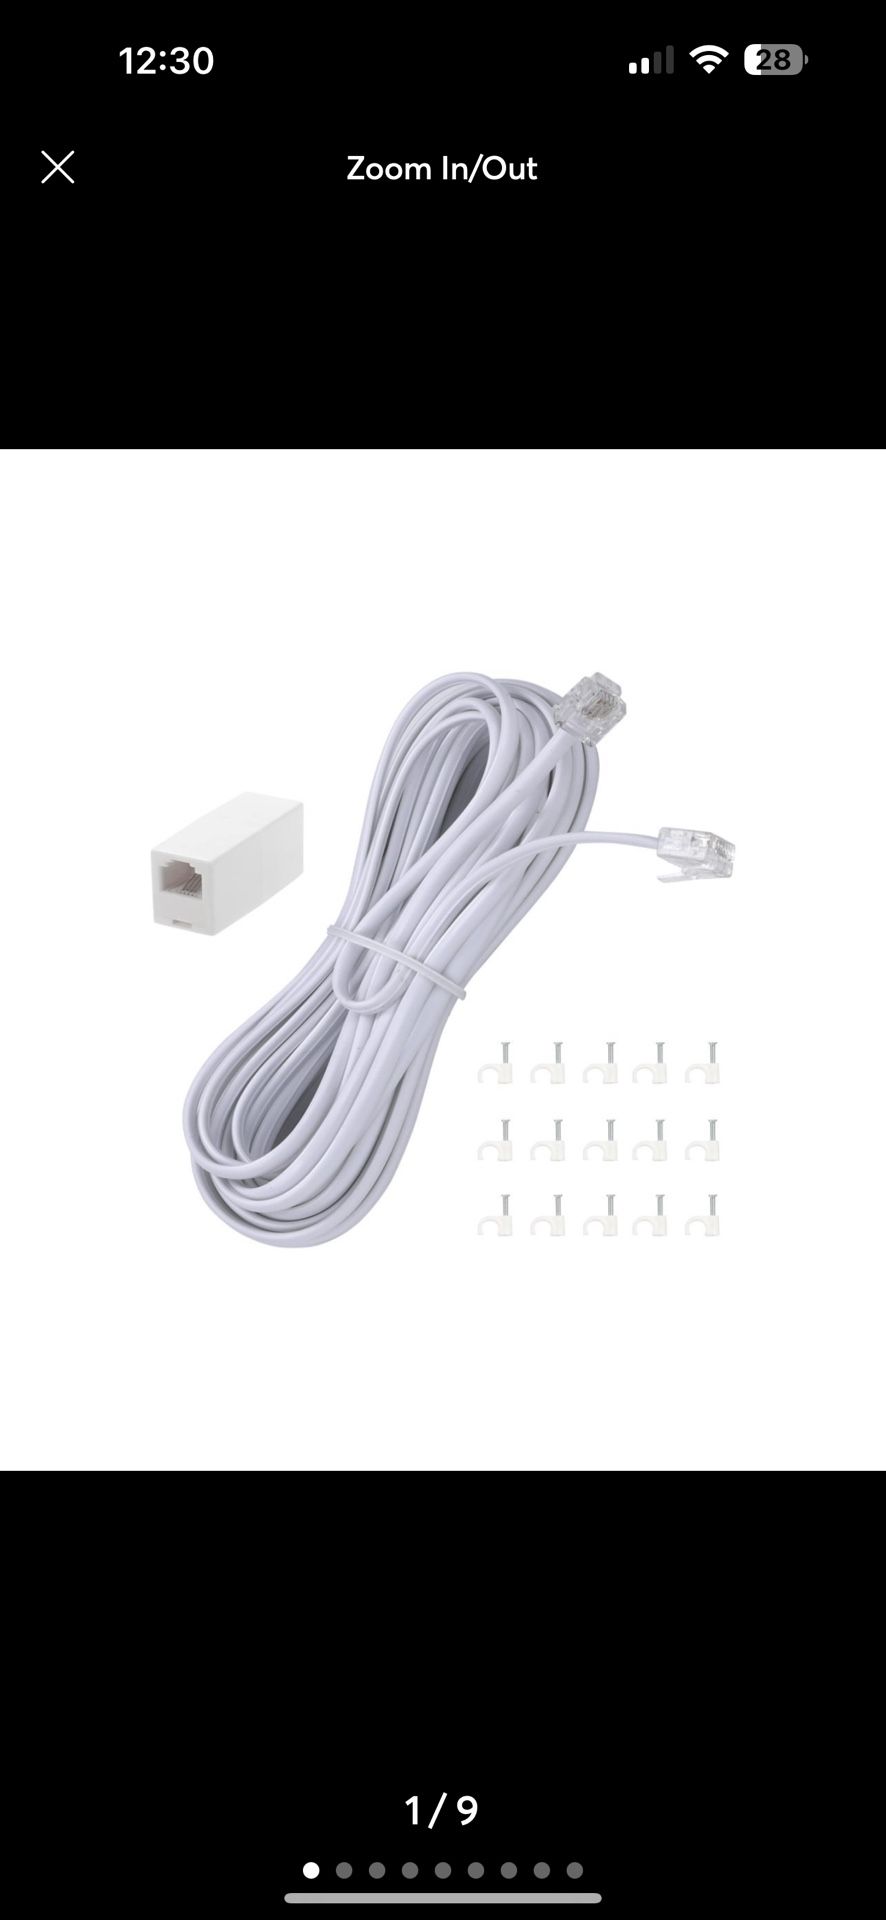 15’  Telephone Extension Cord Phone Cable Line Wire, with RJ11 Plug and 1 in-Lin